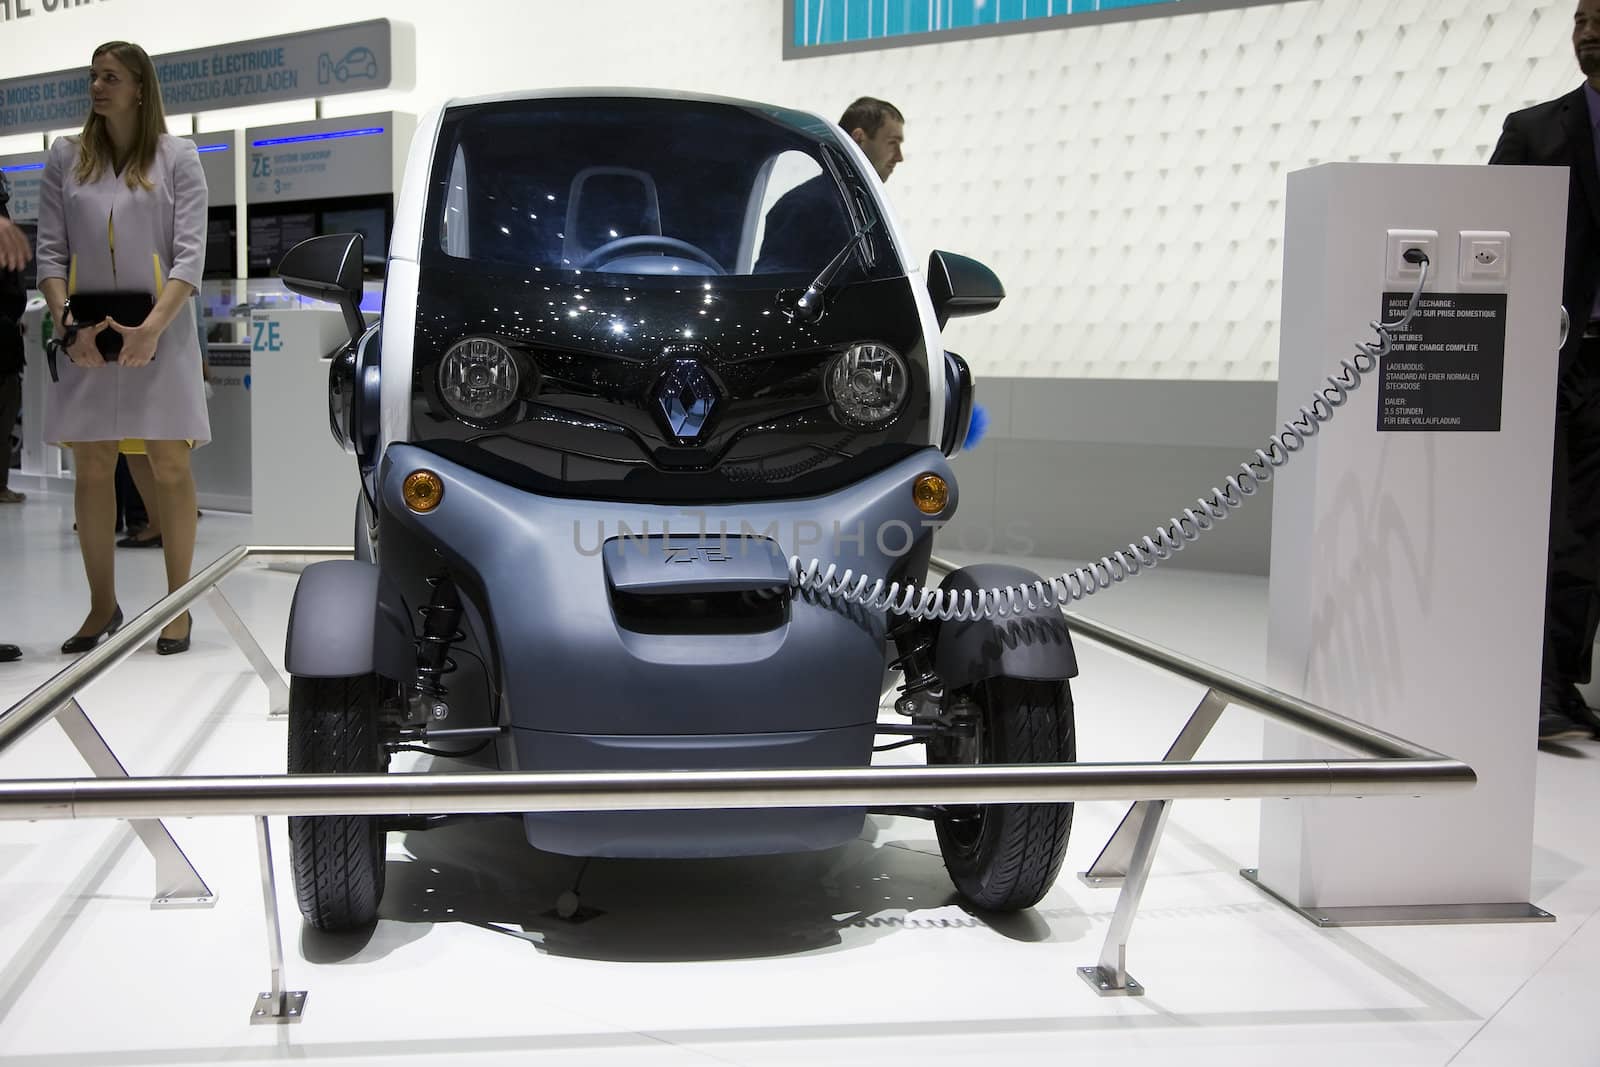 GENEVA, SWITZERLAND - MARCH 4, 2011 - Renault Twizy is presented at the annual motor show in Geneva on March 4, 2011.